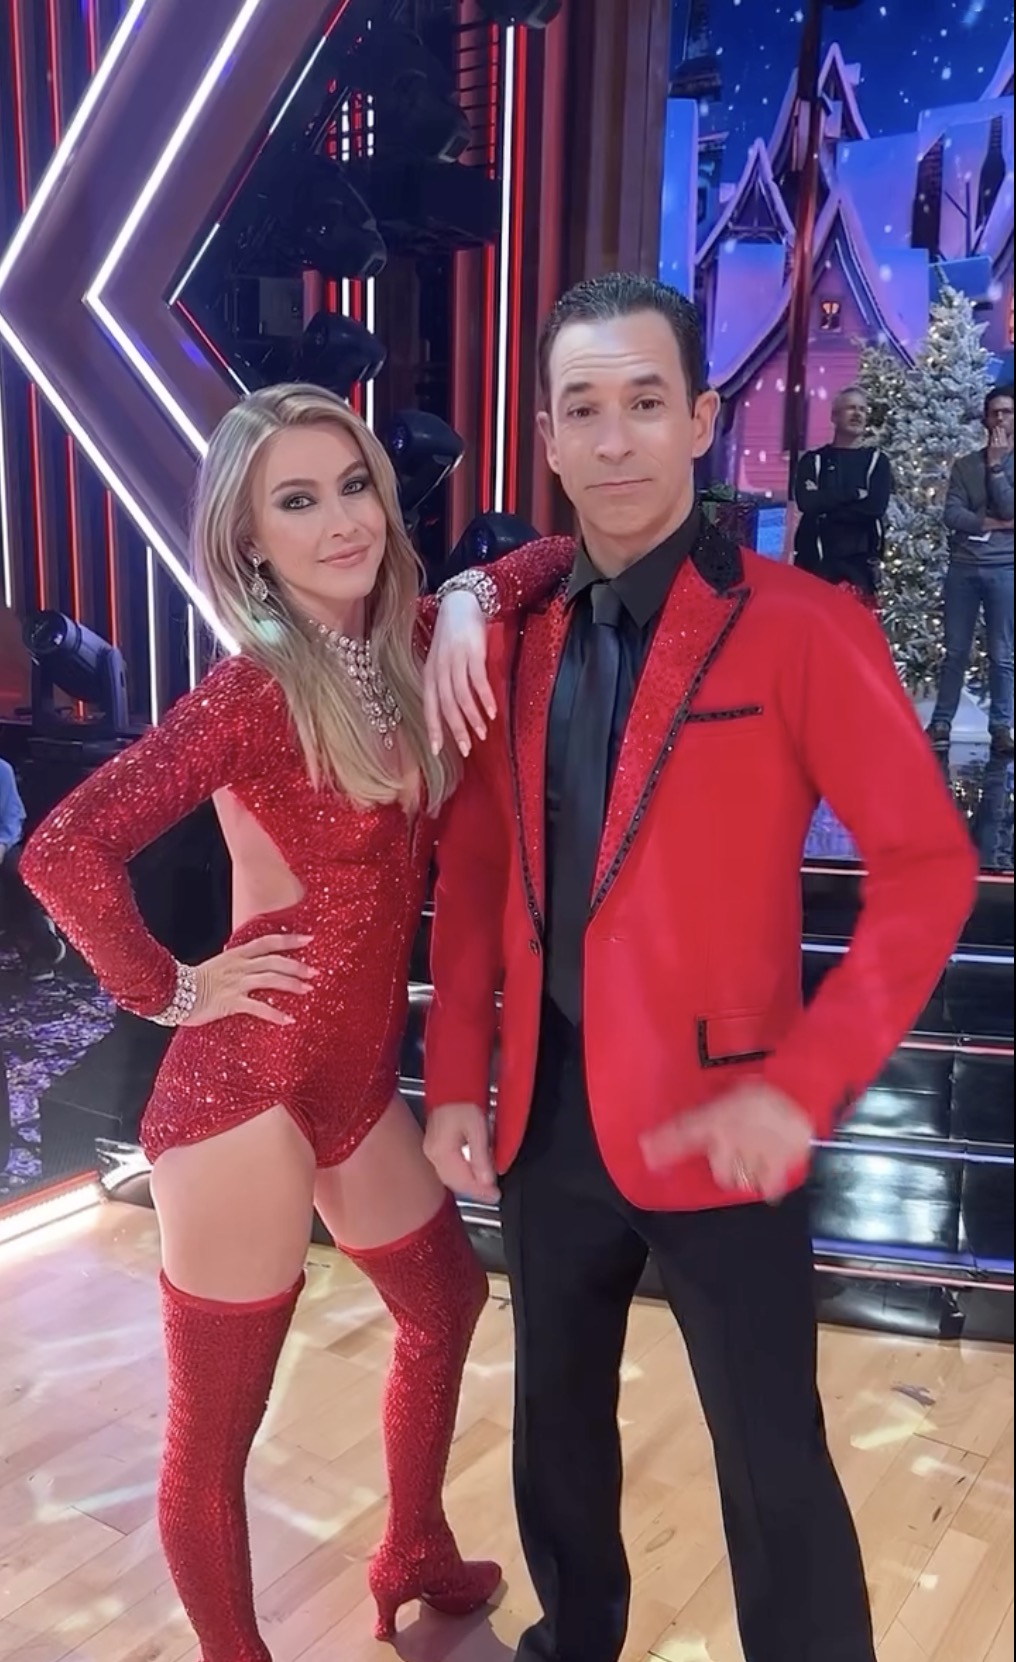 Fans swore they'd 'boycott' DWTS due to Julianne's 'inappropriate' fashion on the show